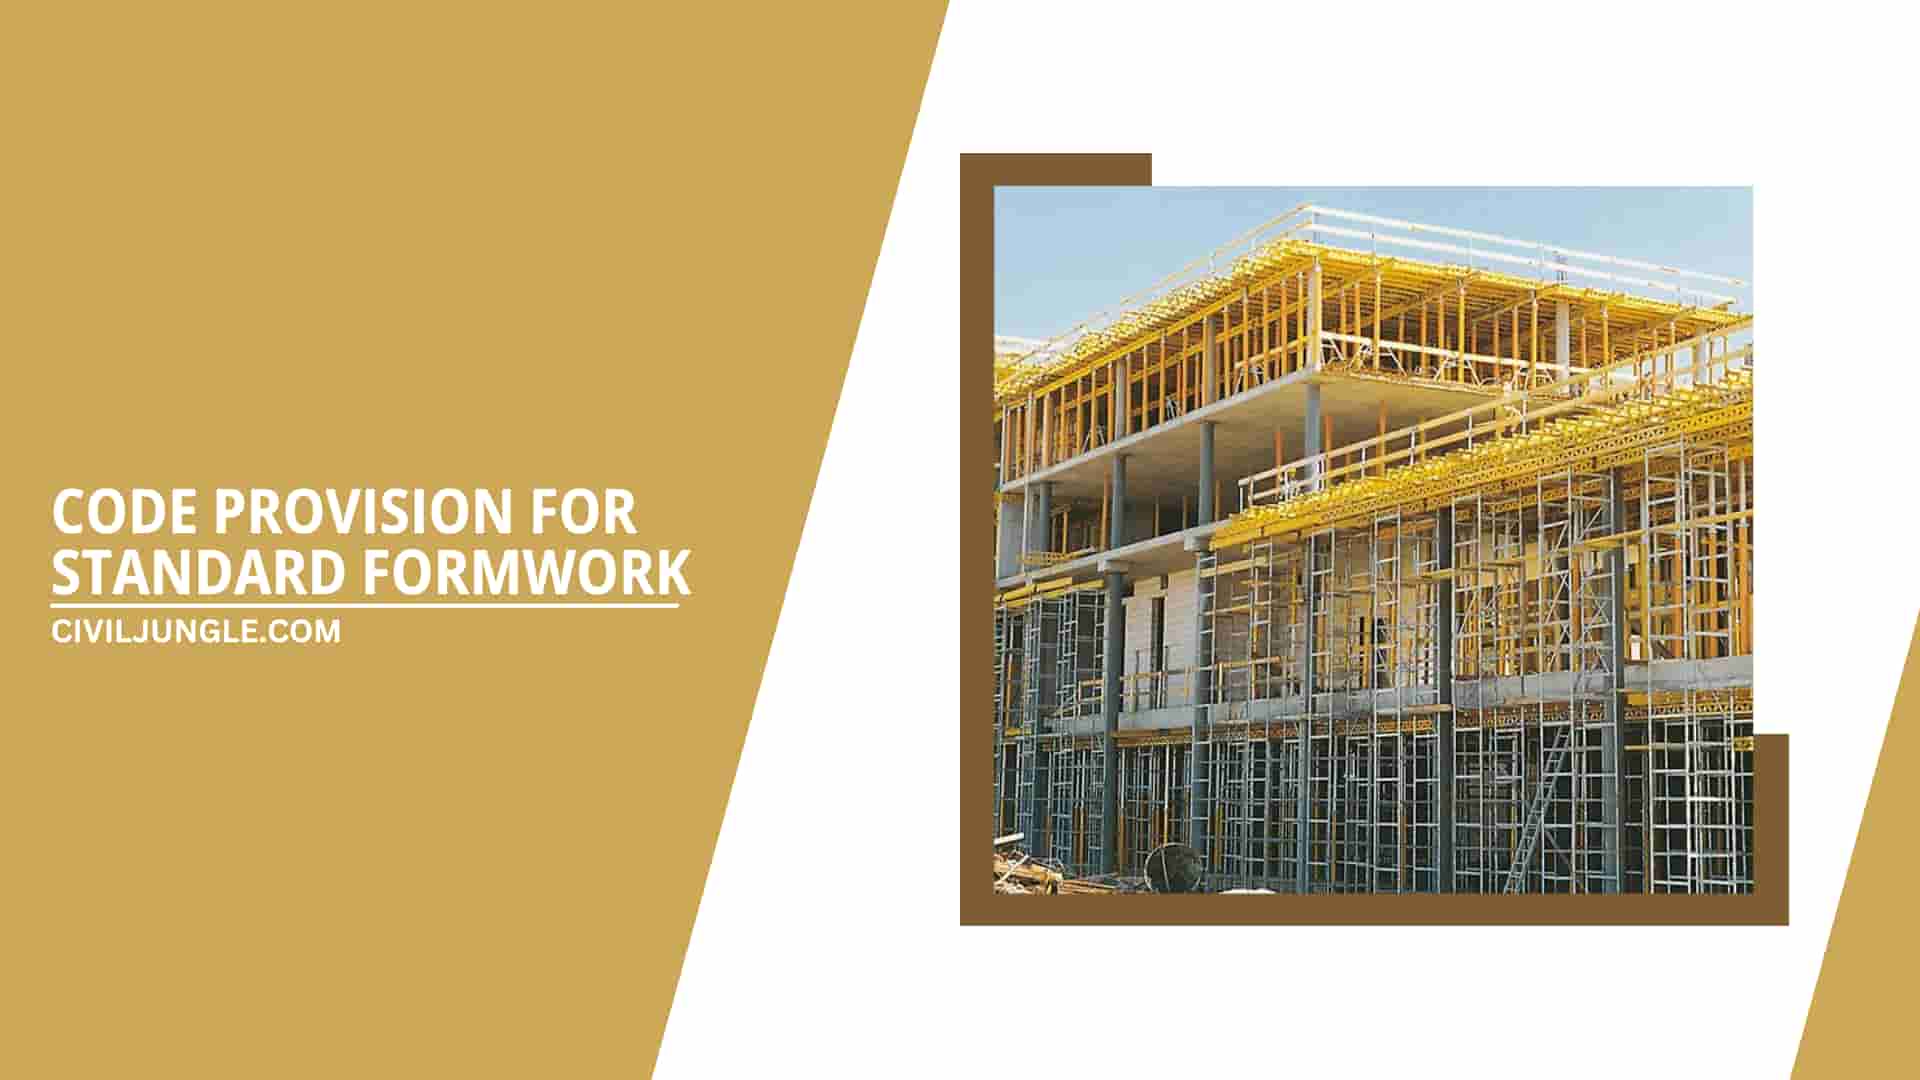 Code Provision for Standard Formwork